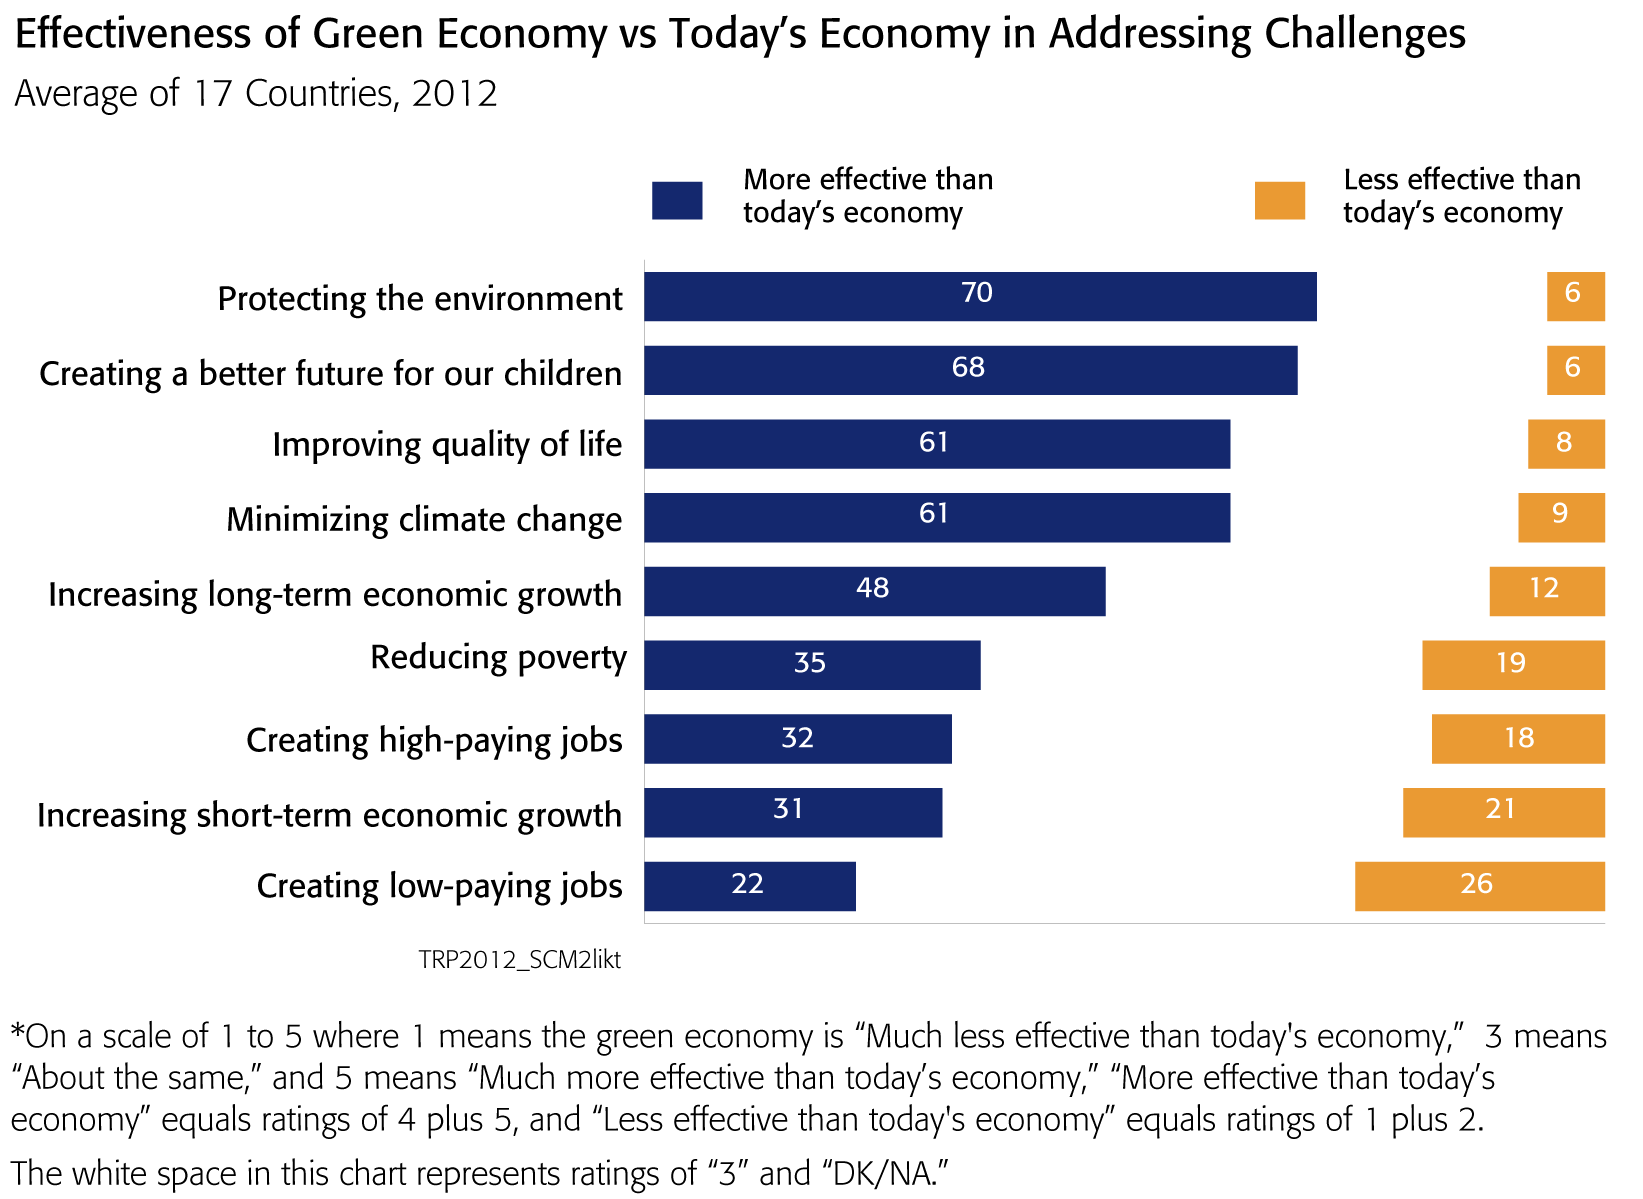 Green Economy Will Boost Jobs and Economic Growth, According to ...